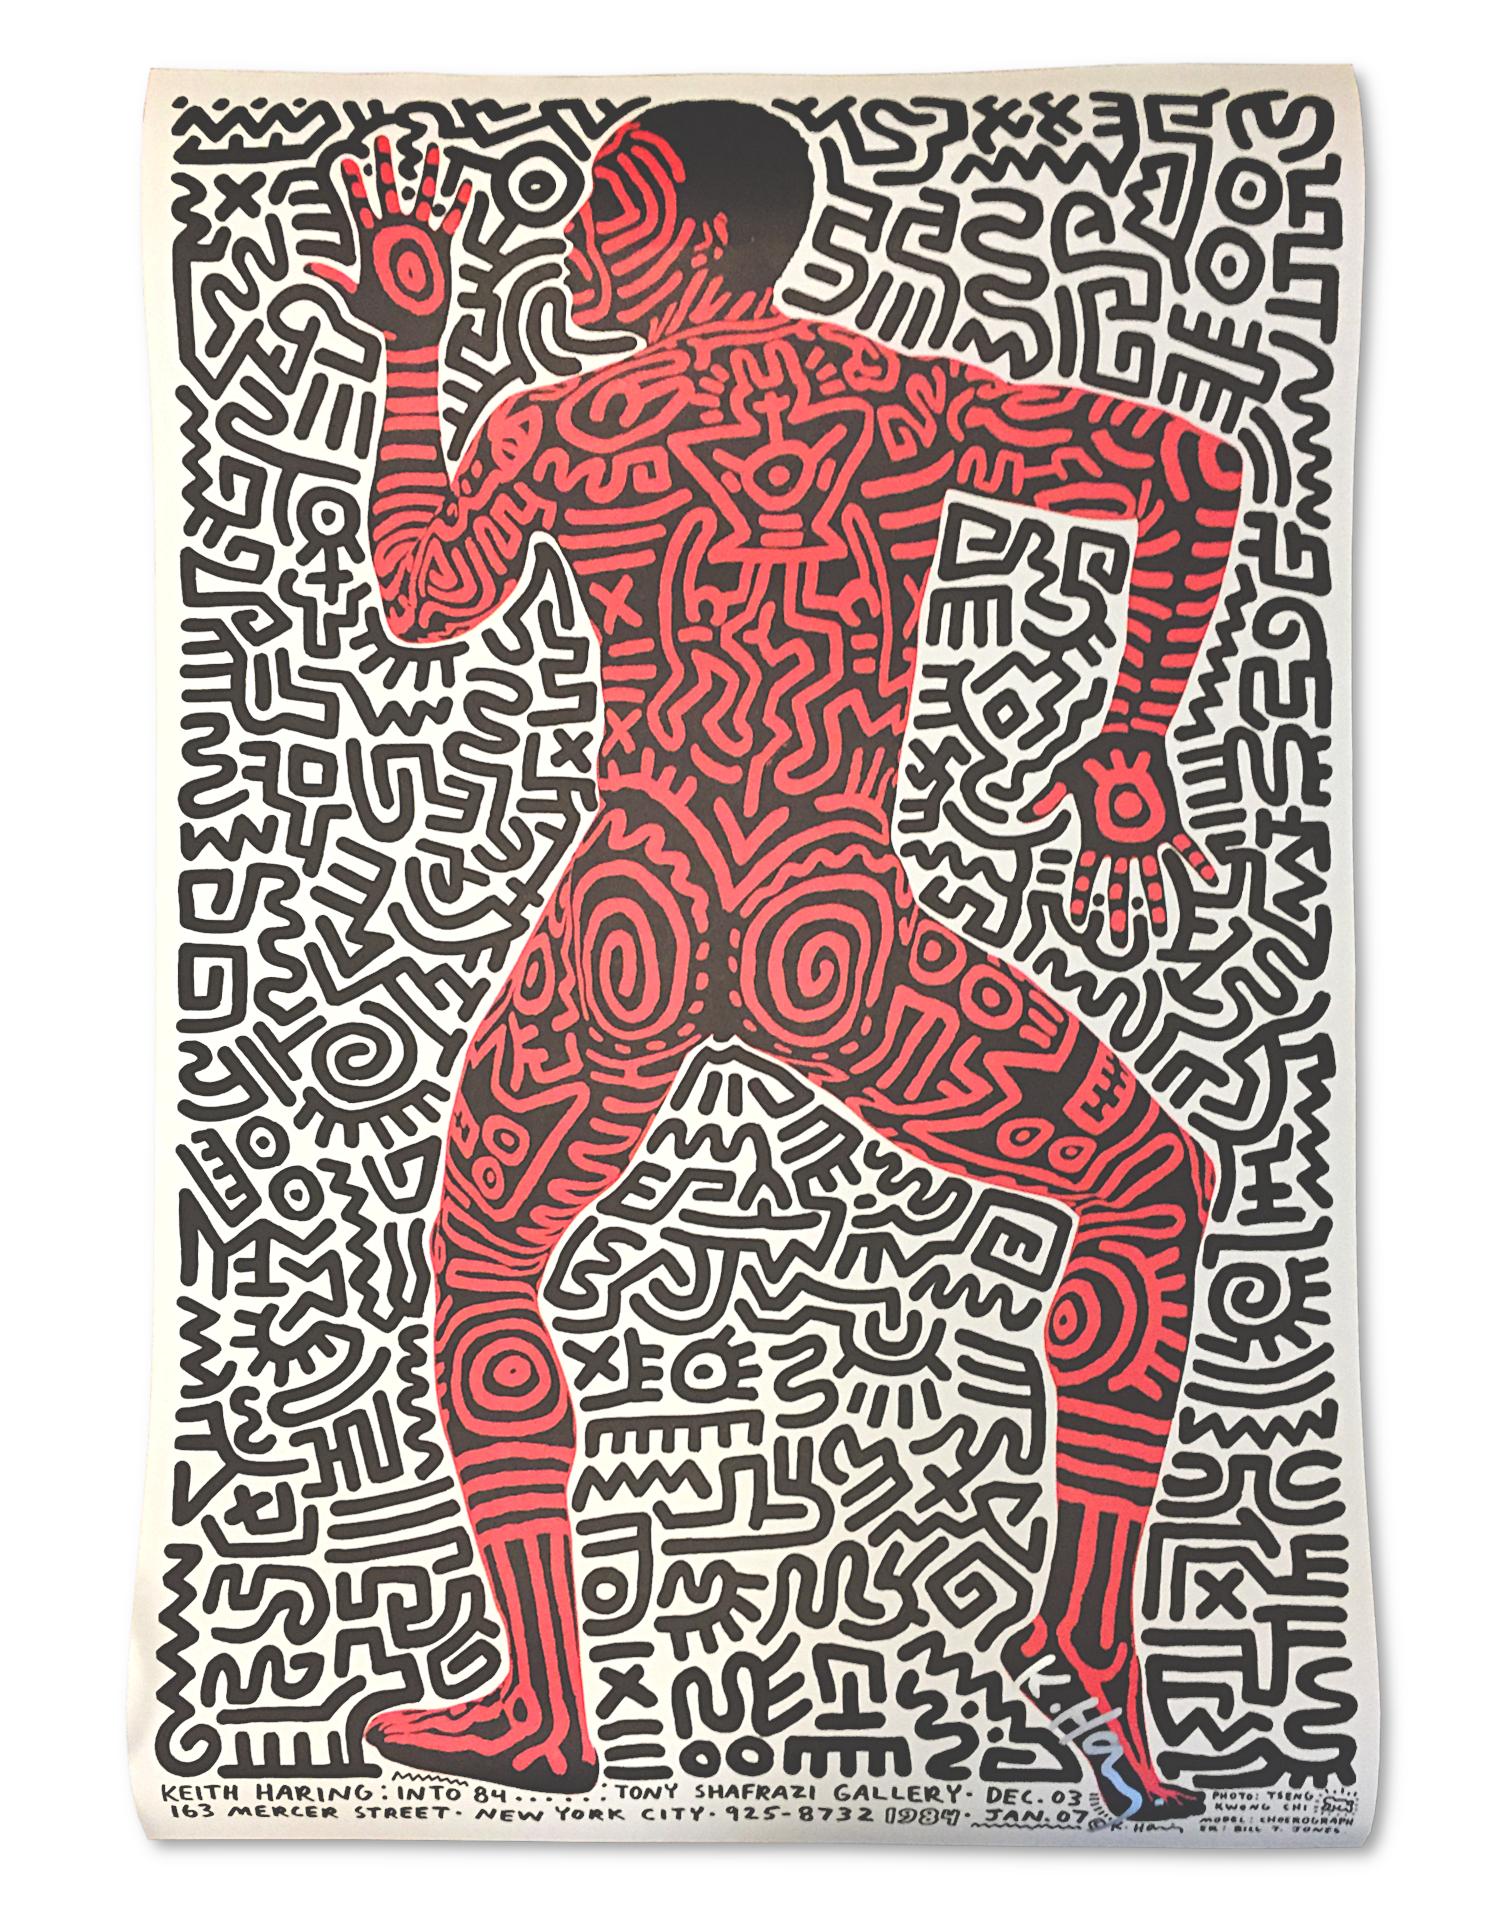 Keith Haring signed original 1983 exhibition poster
This is a first edition Keith Haring limited edition exhibition poster. 

Poster measures c.34 x 24 inches. Created by Haring in 1983 to promote his Into 84 exhibition at the Tony Shafrazi